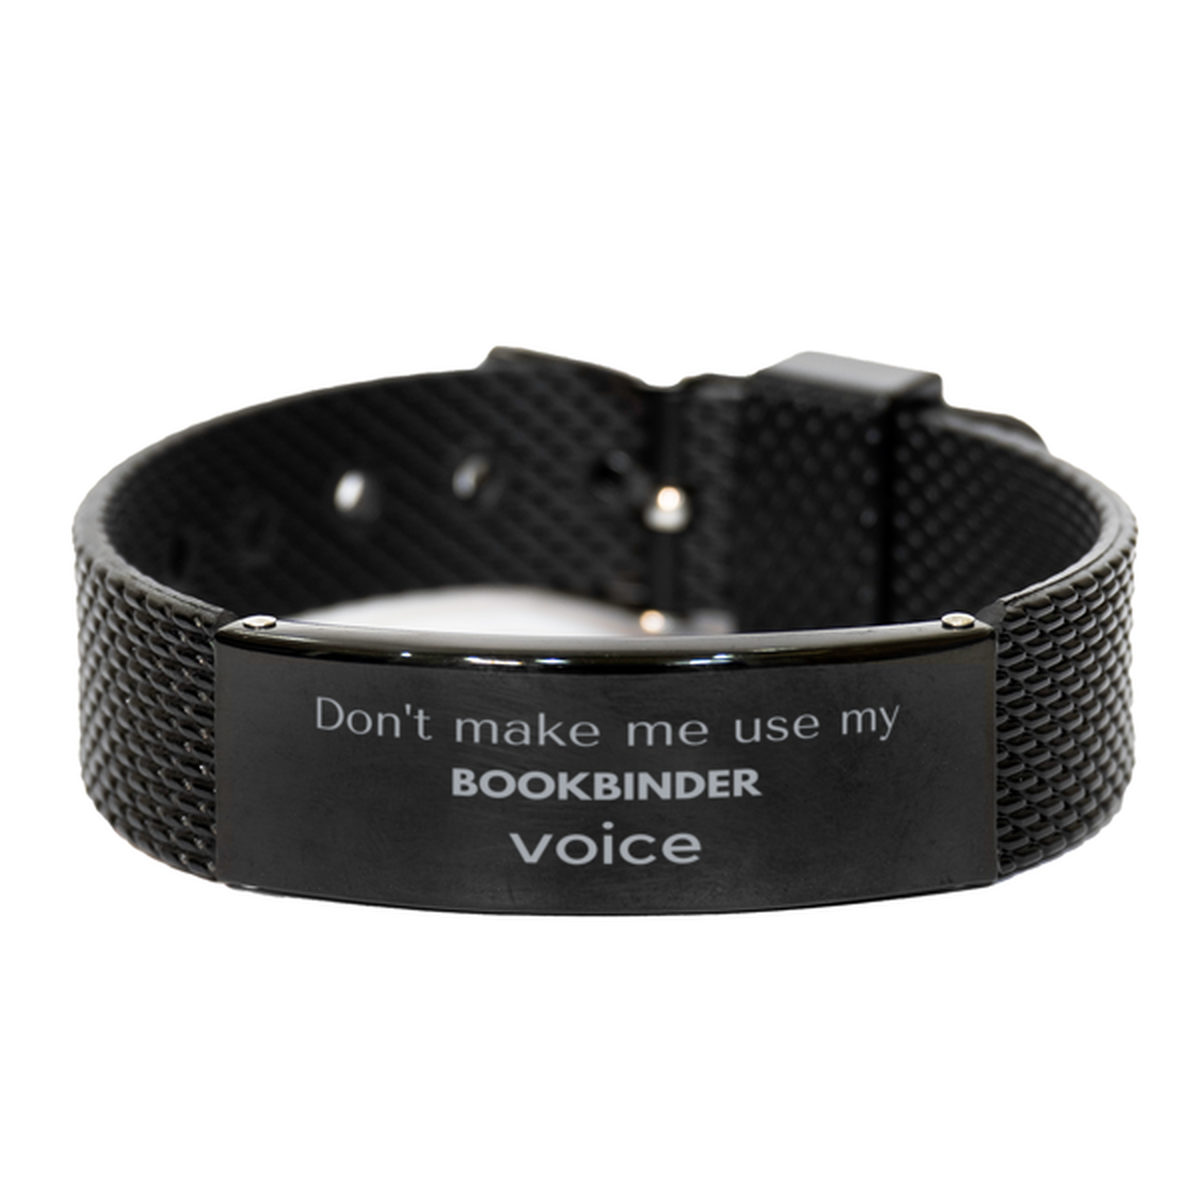 Don't make me use my Bookbinder voice, Sarcasm Bookbinder Gifts, Christmas Bookbinder Black Shark Mesh Bracelet Birthday Unique Gifts For Bookbinder Coworkers, Men, Women, Colleague, Friends